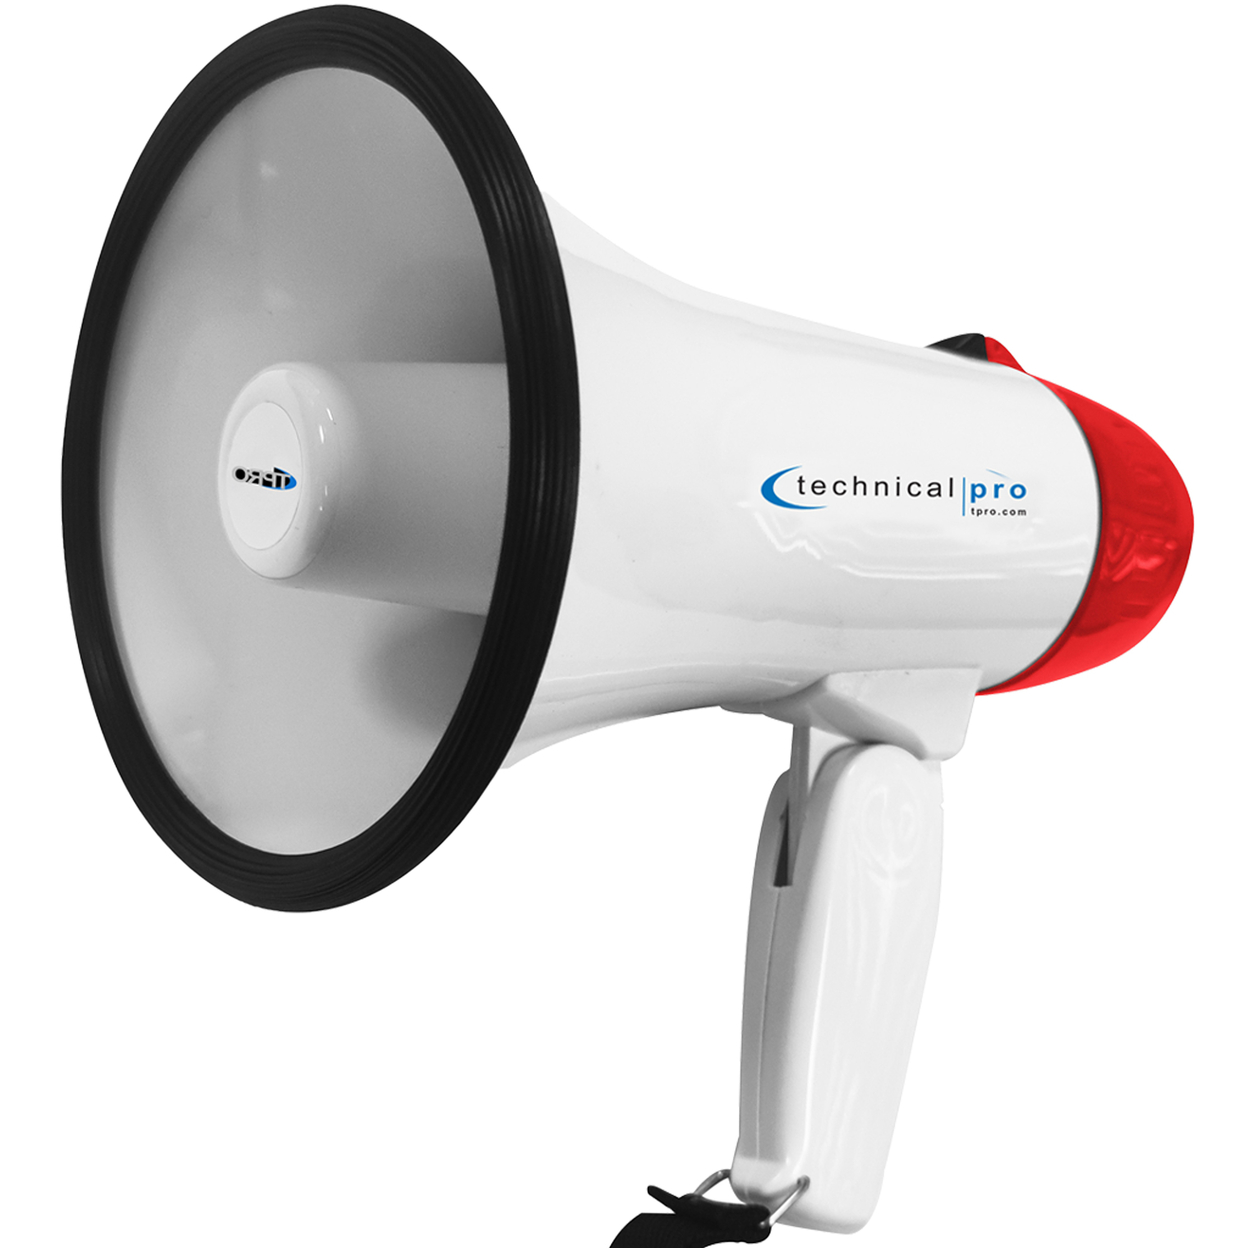 Technical Pro 40 Watts Lightweight Portable 300M Range White And Red Megaphone Bullhorn With Strap, Siren, And Volume Control